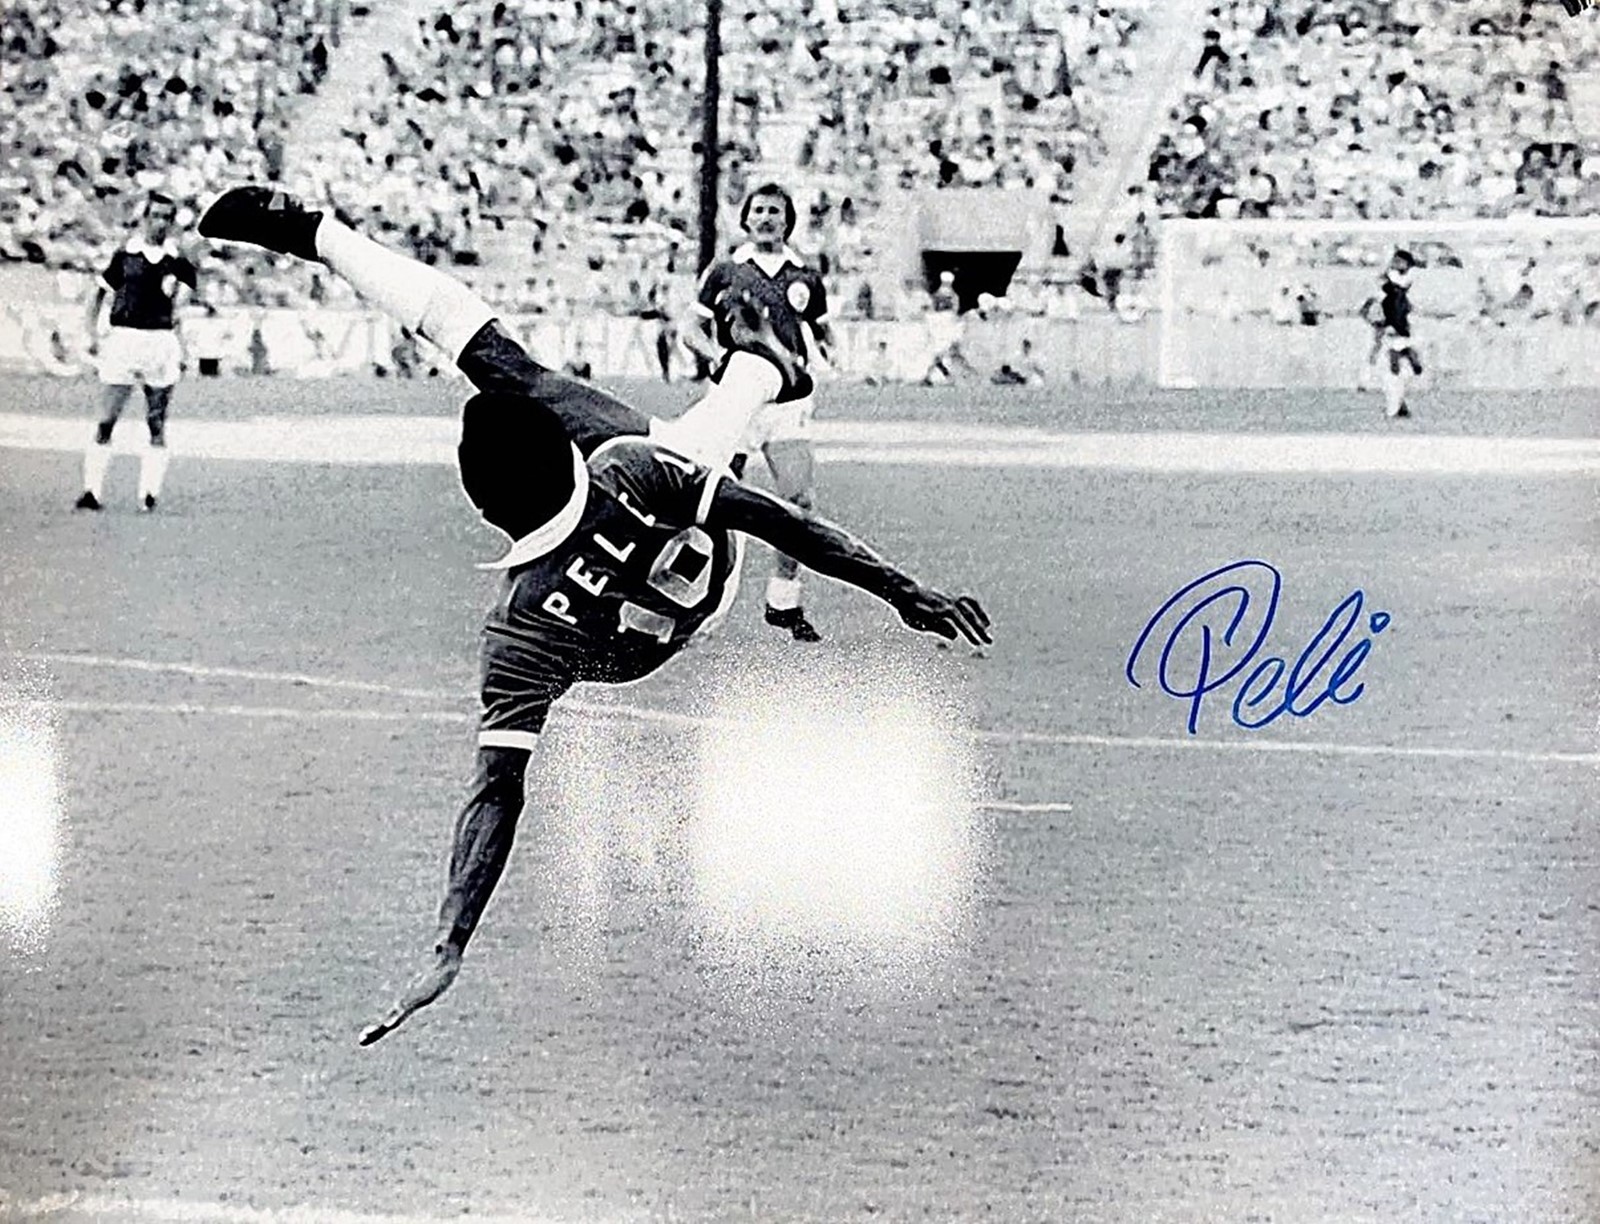 Football Pele signed 20x16 New York Cosmos black and white photo. Regarded as one of the greatest